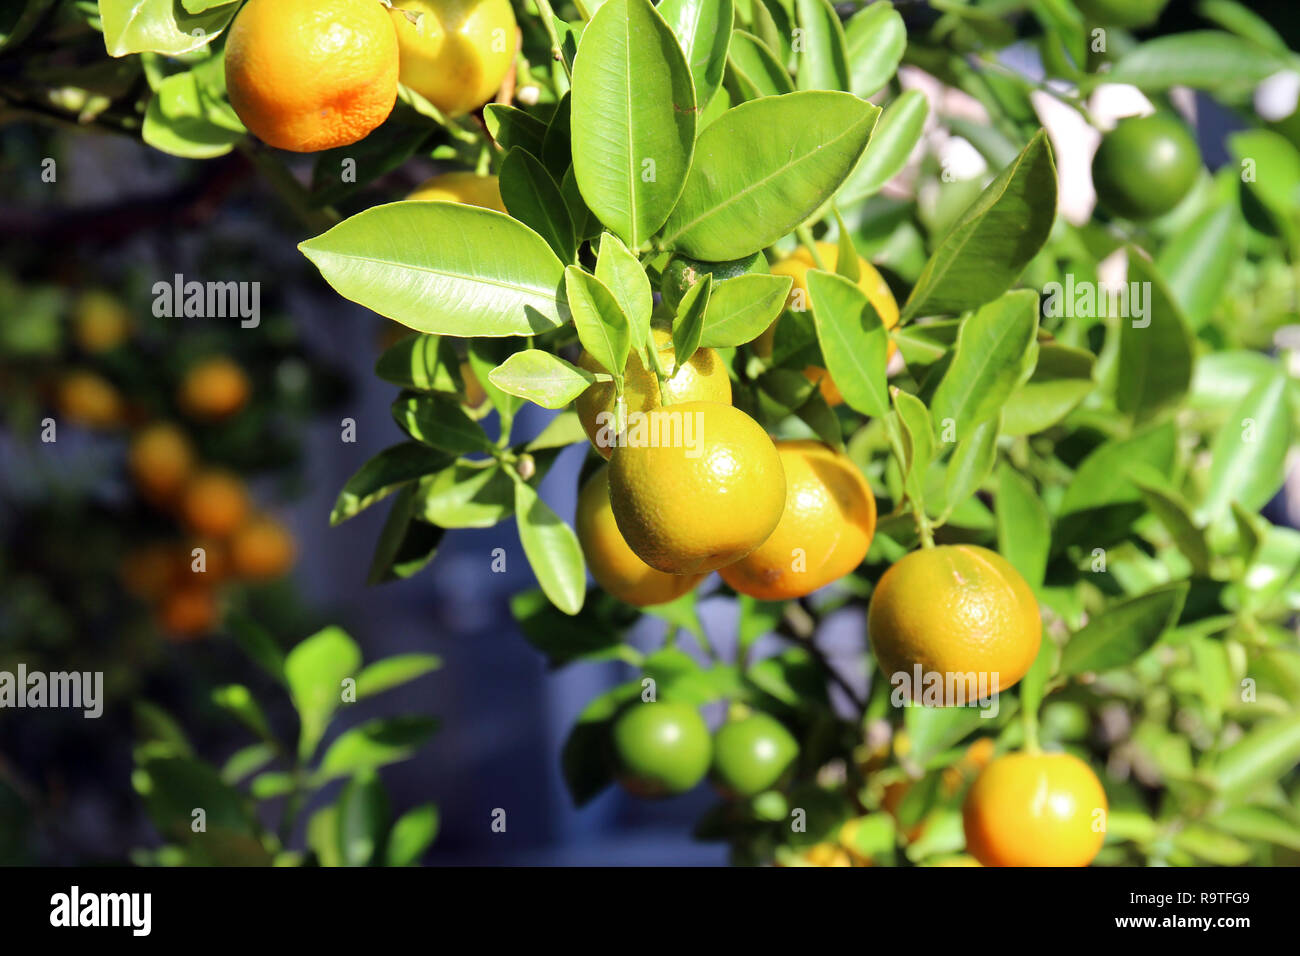 Close up of a branch of a Calamondin Orange tree filled with fruit in varying stages of ripeness Stock Photo